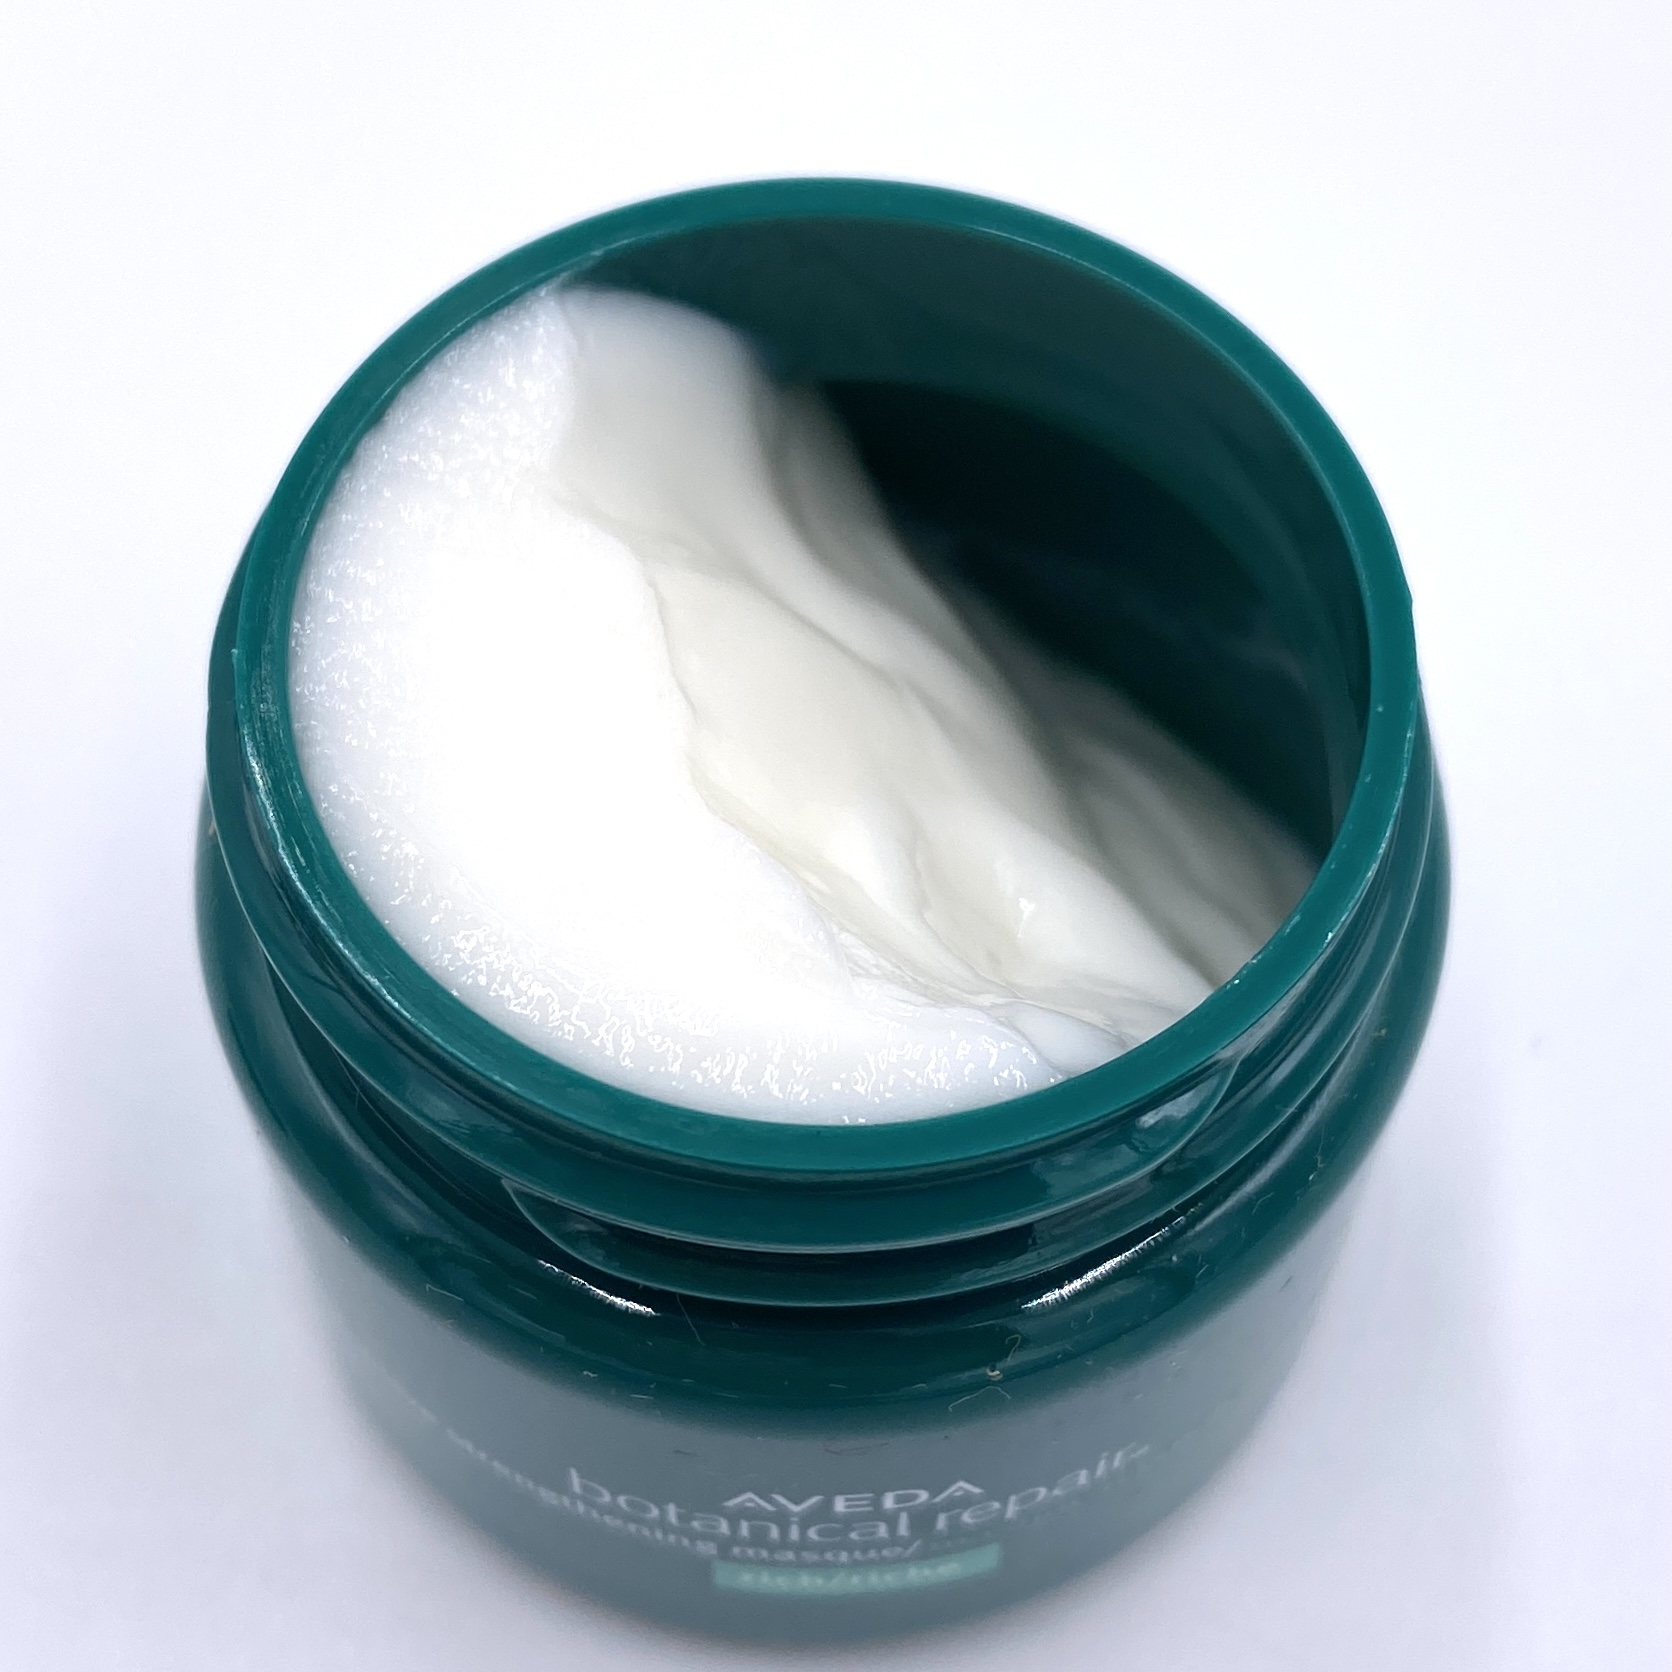 Aveda Botanical Repair Intensive Strenghtening Masque Rich Open for Cocotique January 2021